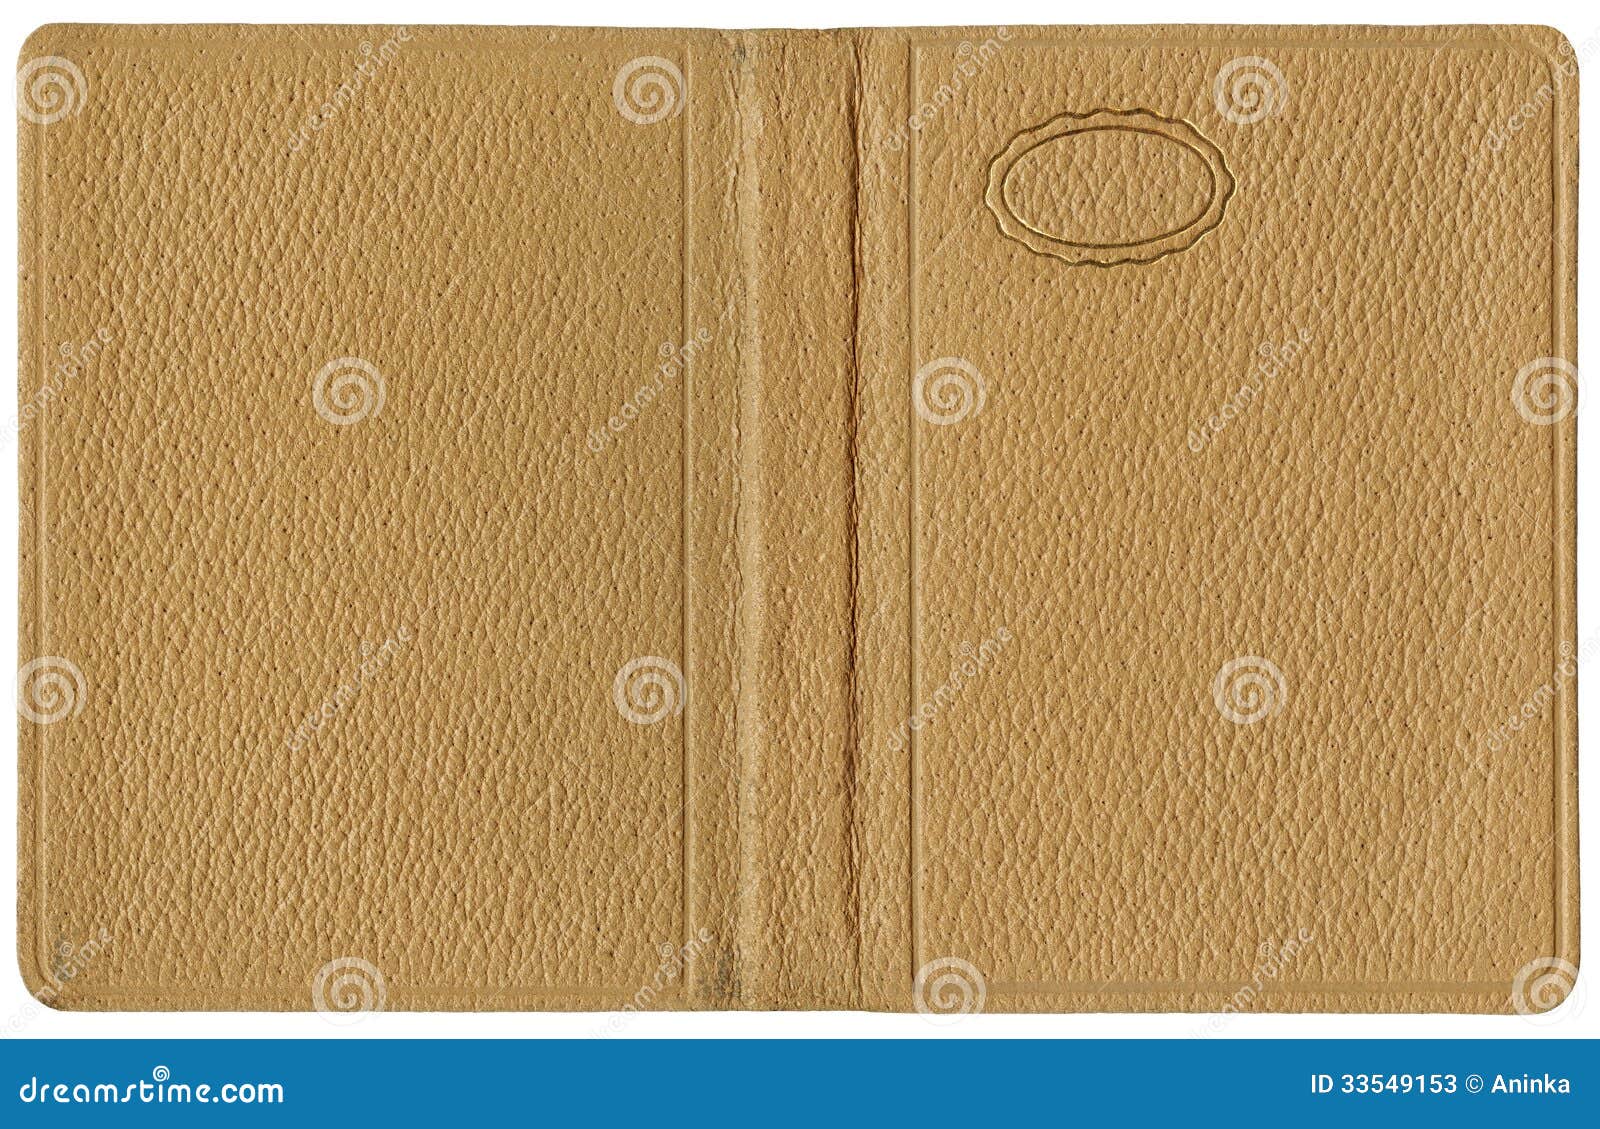 leather cover beige